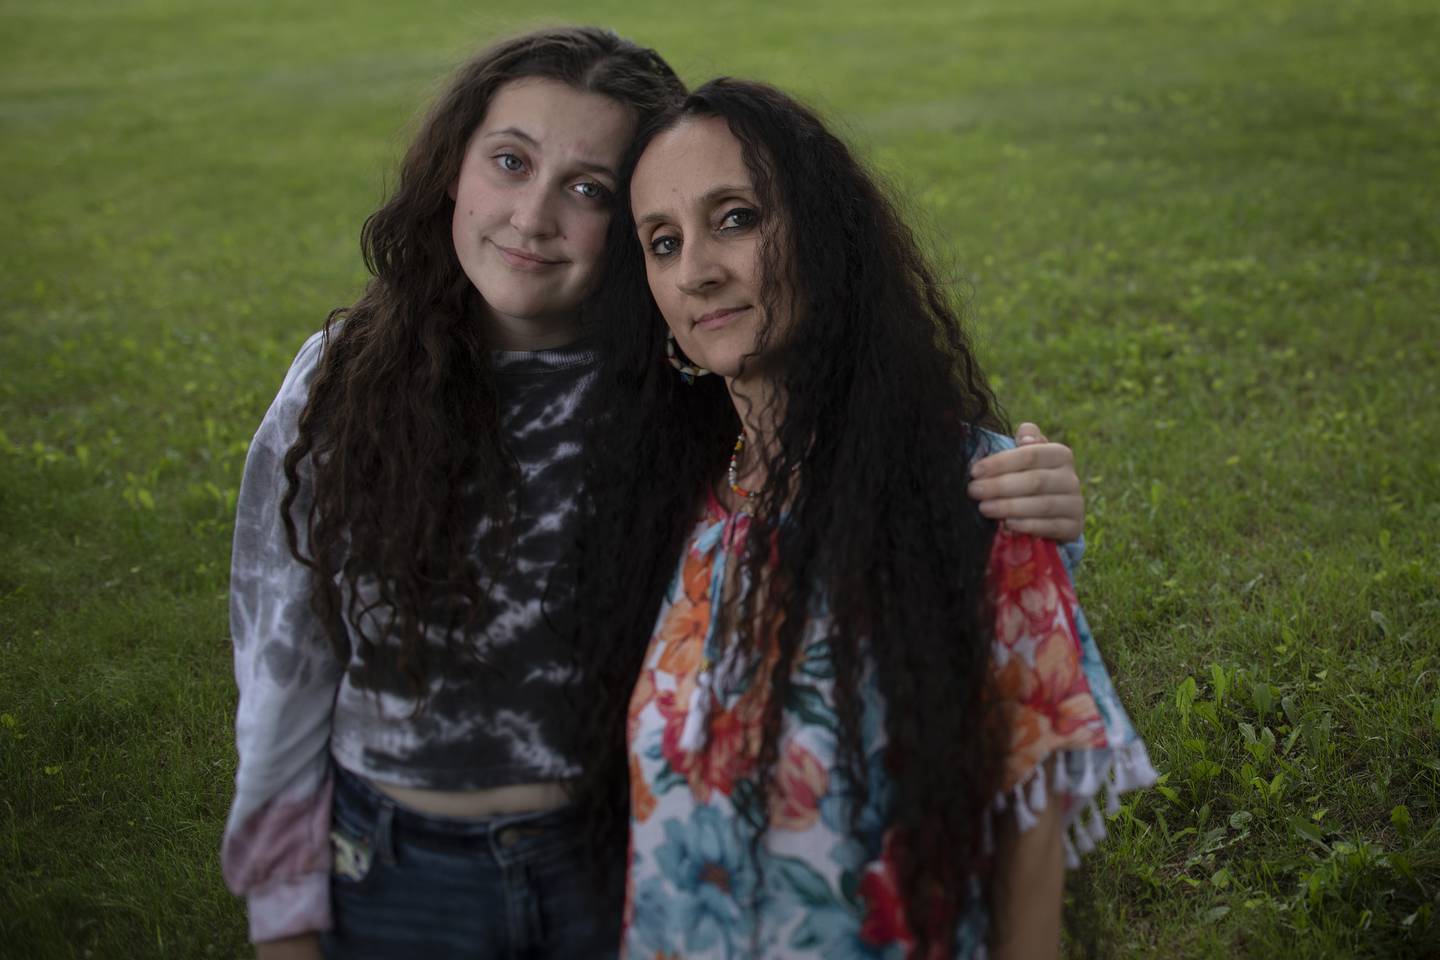 Isabel Tischer, left, recently wrote a paper for school about the Tylenol murders. Her mother, Monica Janus, at right, is the daughter of Joseph Janus, who lost two brothers and a sister-in-law to cyanide poisoning. "He deserves to know who did this to our family," Isabel said.